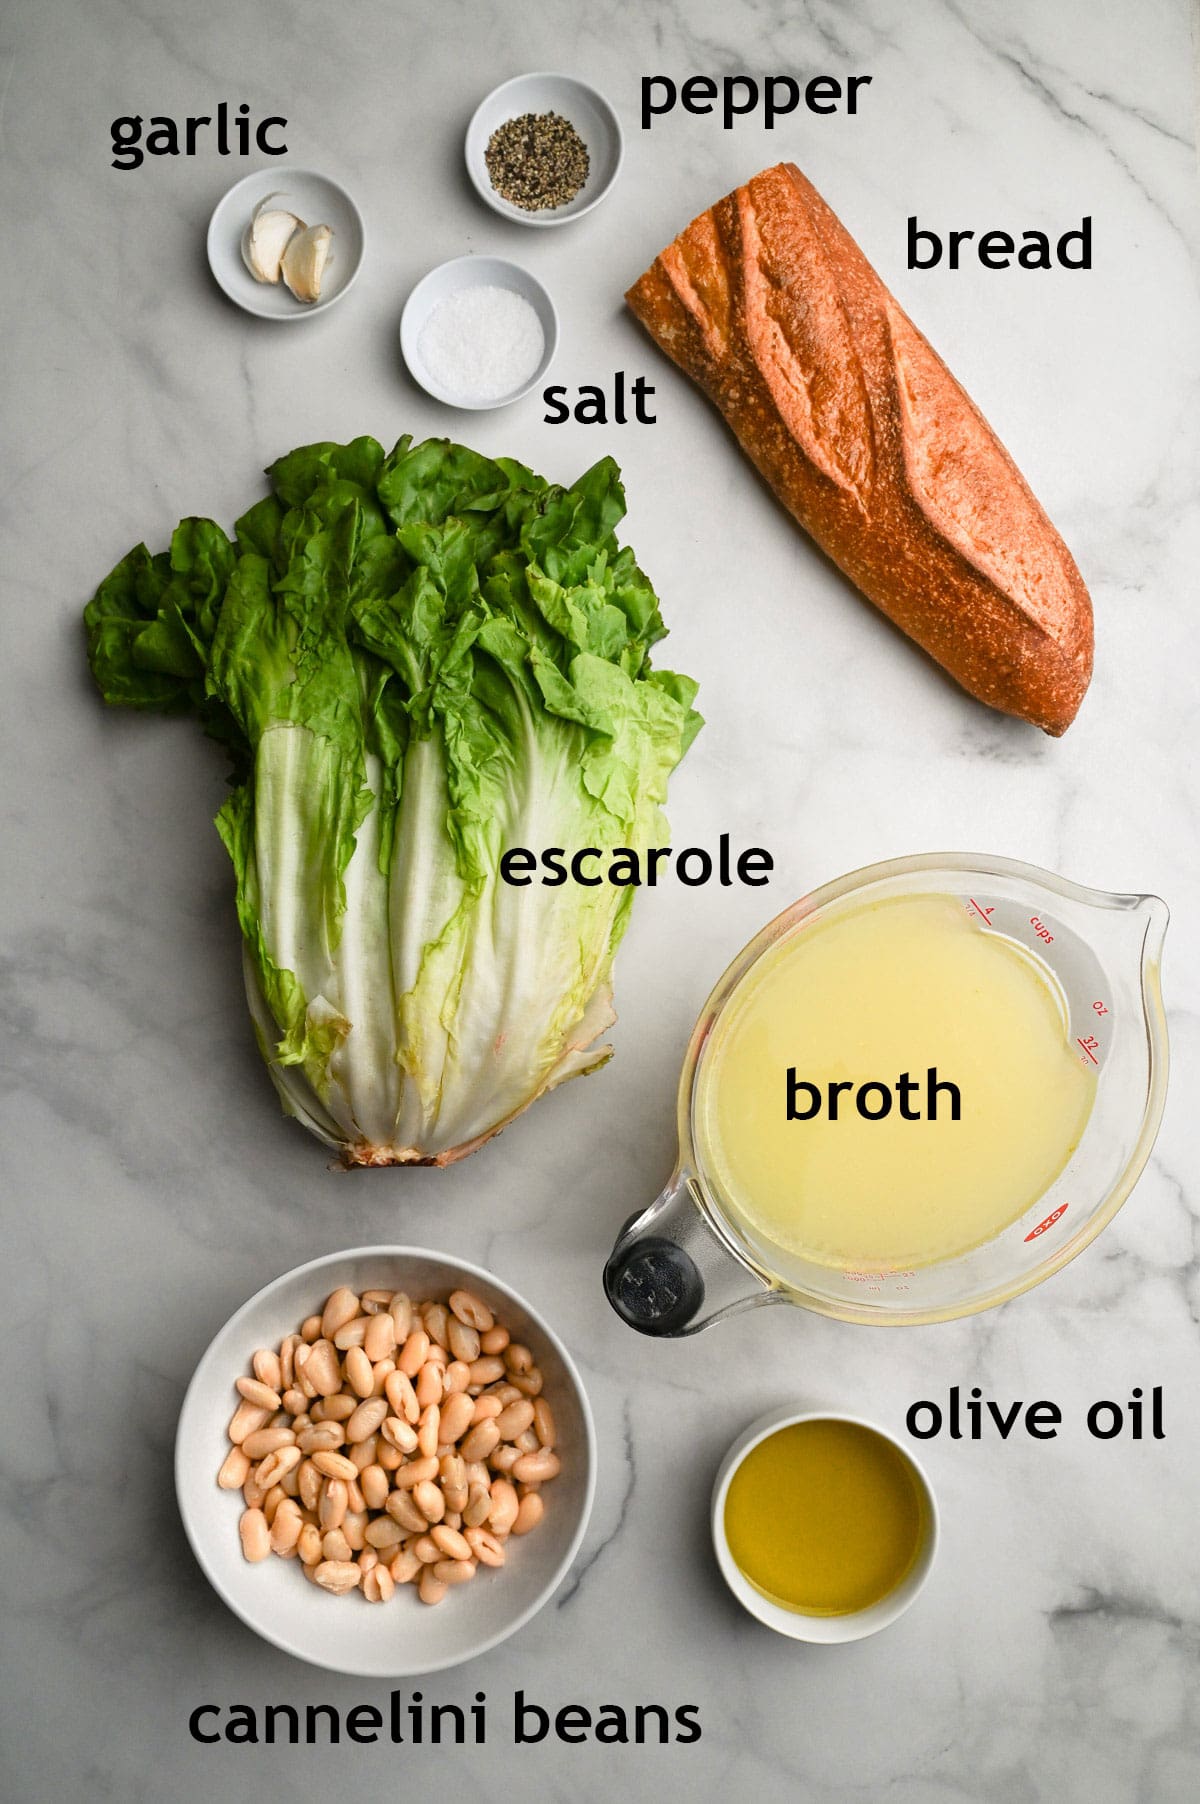 Recipe ingredients, including escarole, cannellini beans, garlic, olive oil, broth and bread.